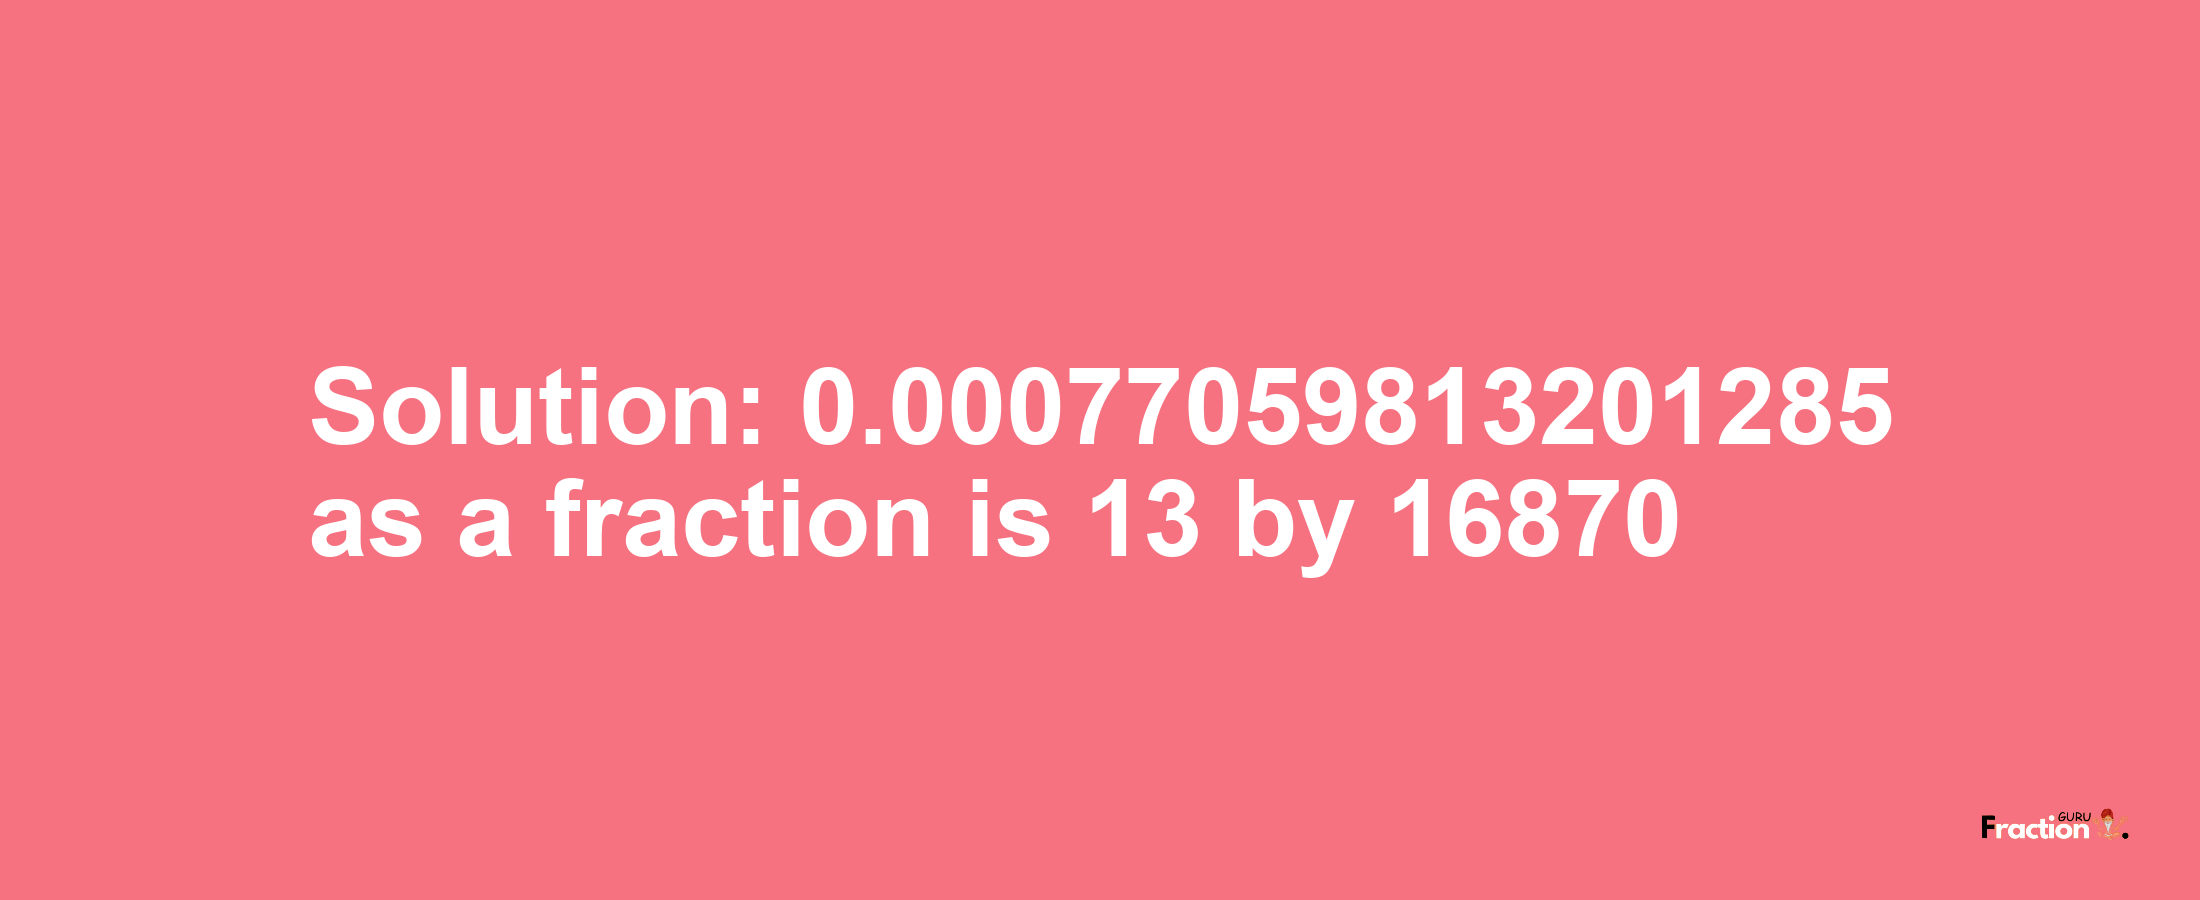 Solution:0.00077059813201285 as a fraction is 13/16870